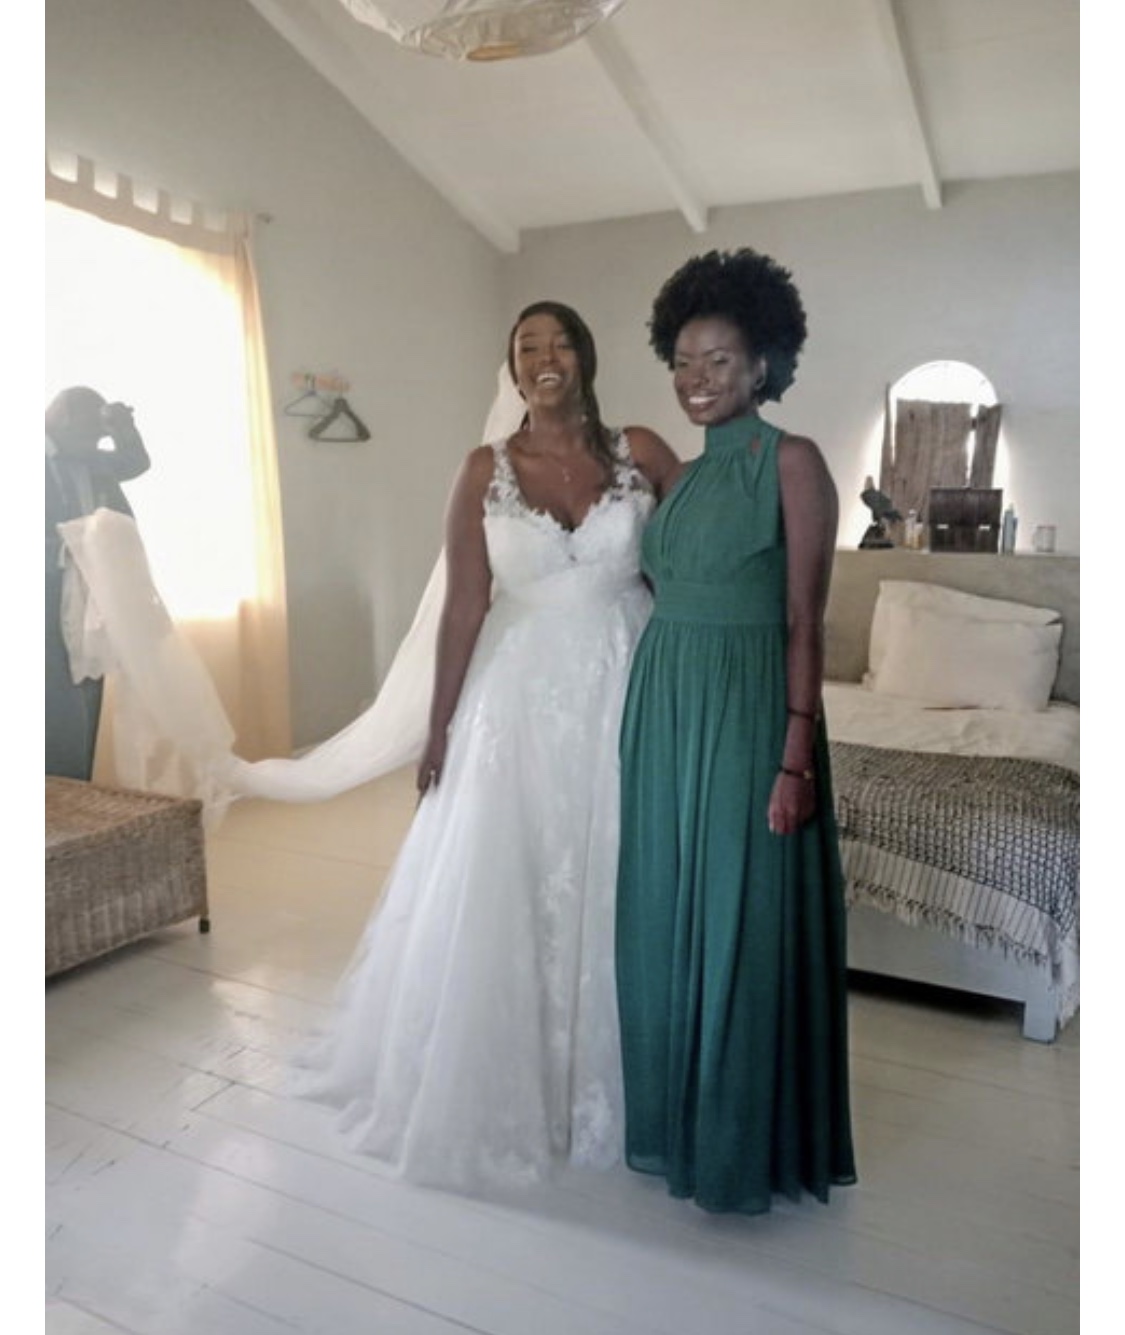 Elani’s Maureen Kunga weds the love of her life in a posh private wedding